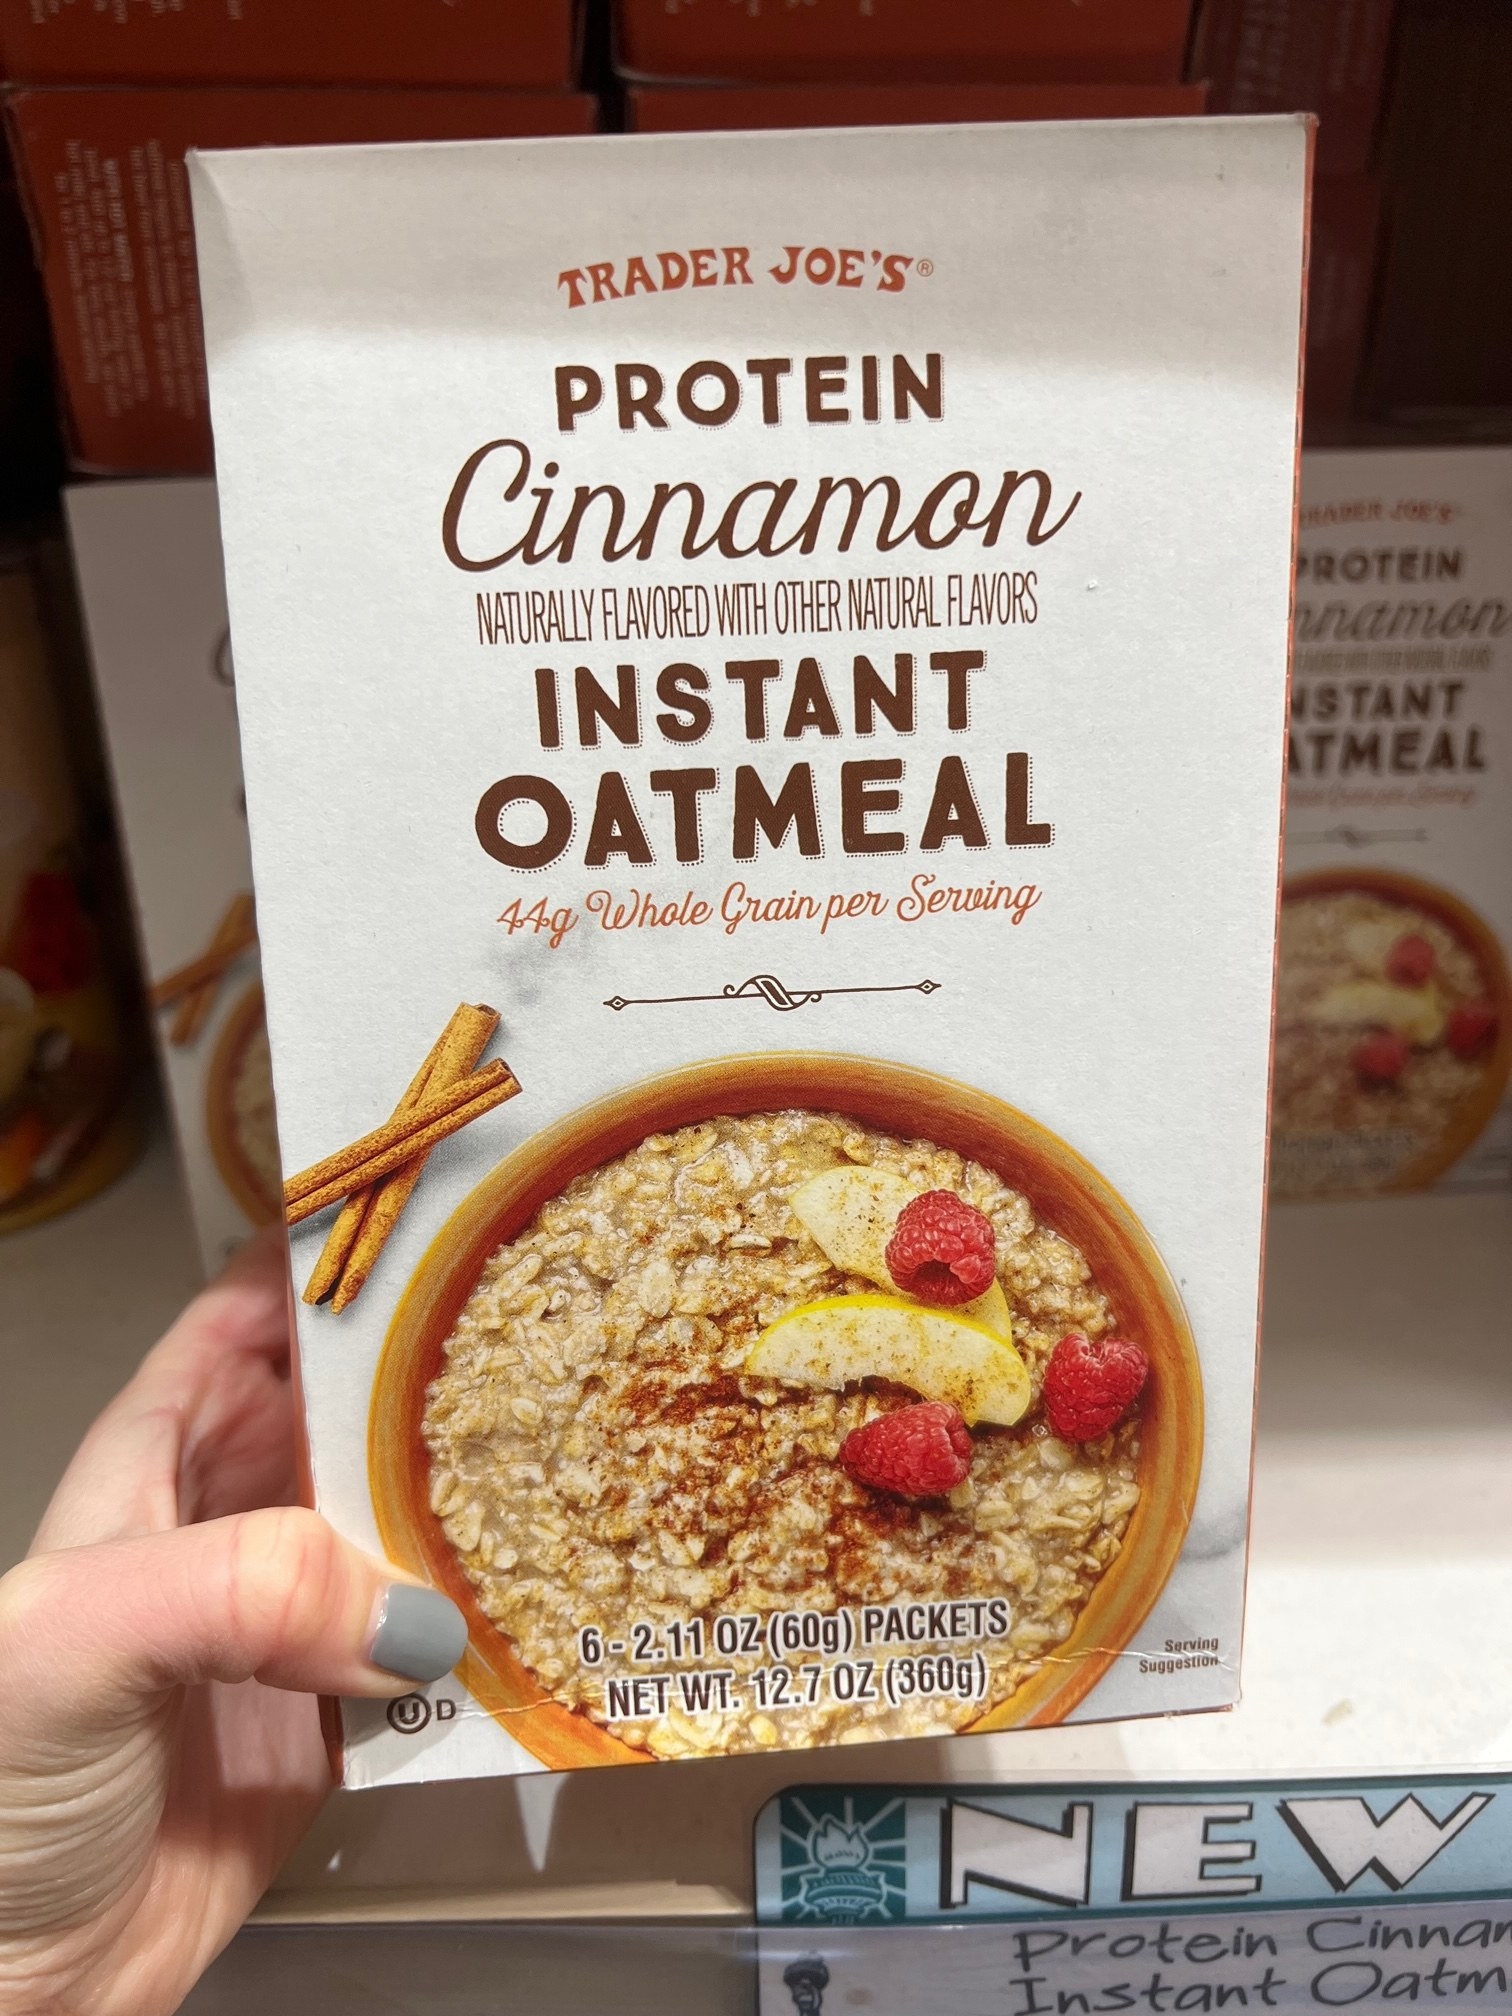 Protein Cinnamon Instant Oatmeal